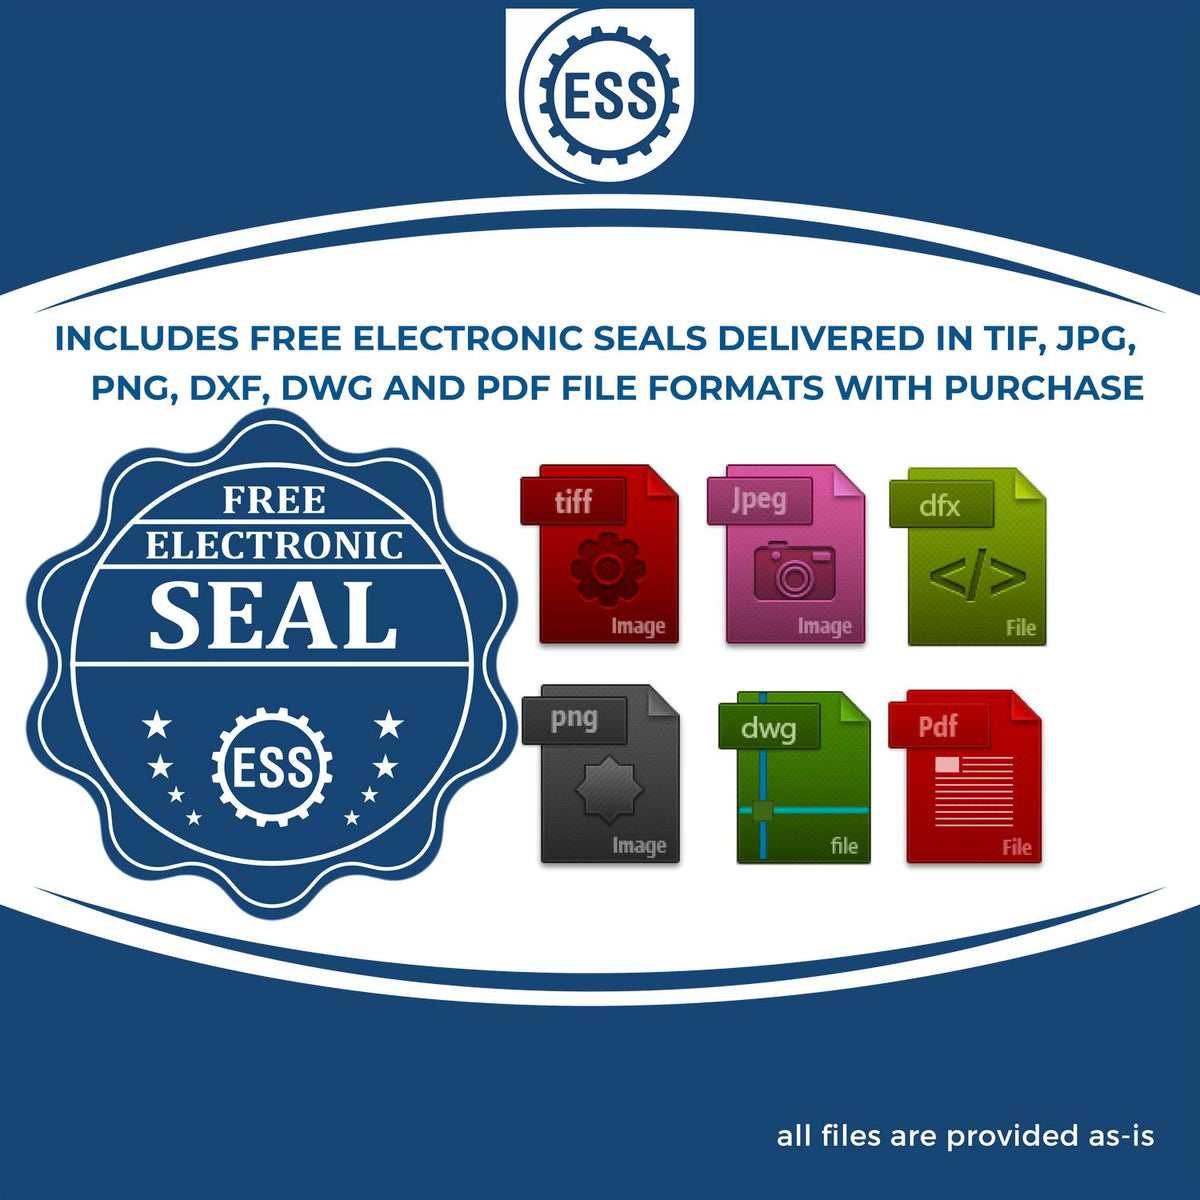 An infographic for the free electronic seal for the MaxLight Premium Pre-Inked Guam Rectangular Notarial Stamp illustrating the different file type icons such as DXF, DWG, TIF, JPG and PNG.